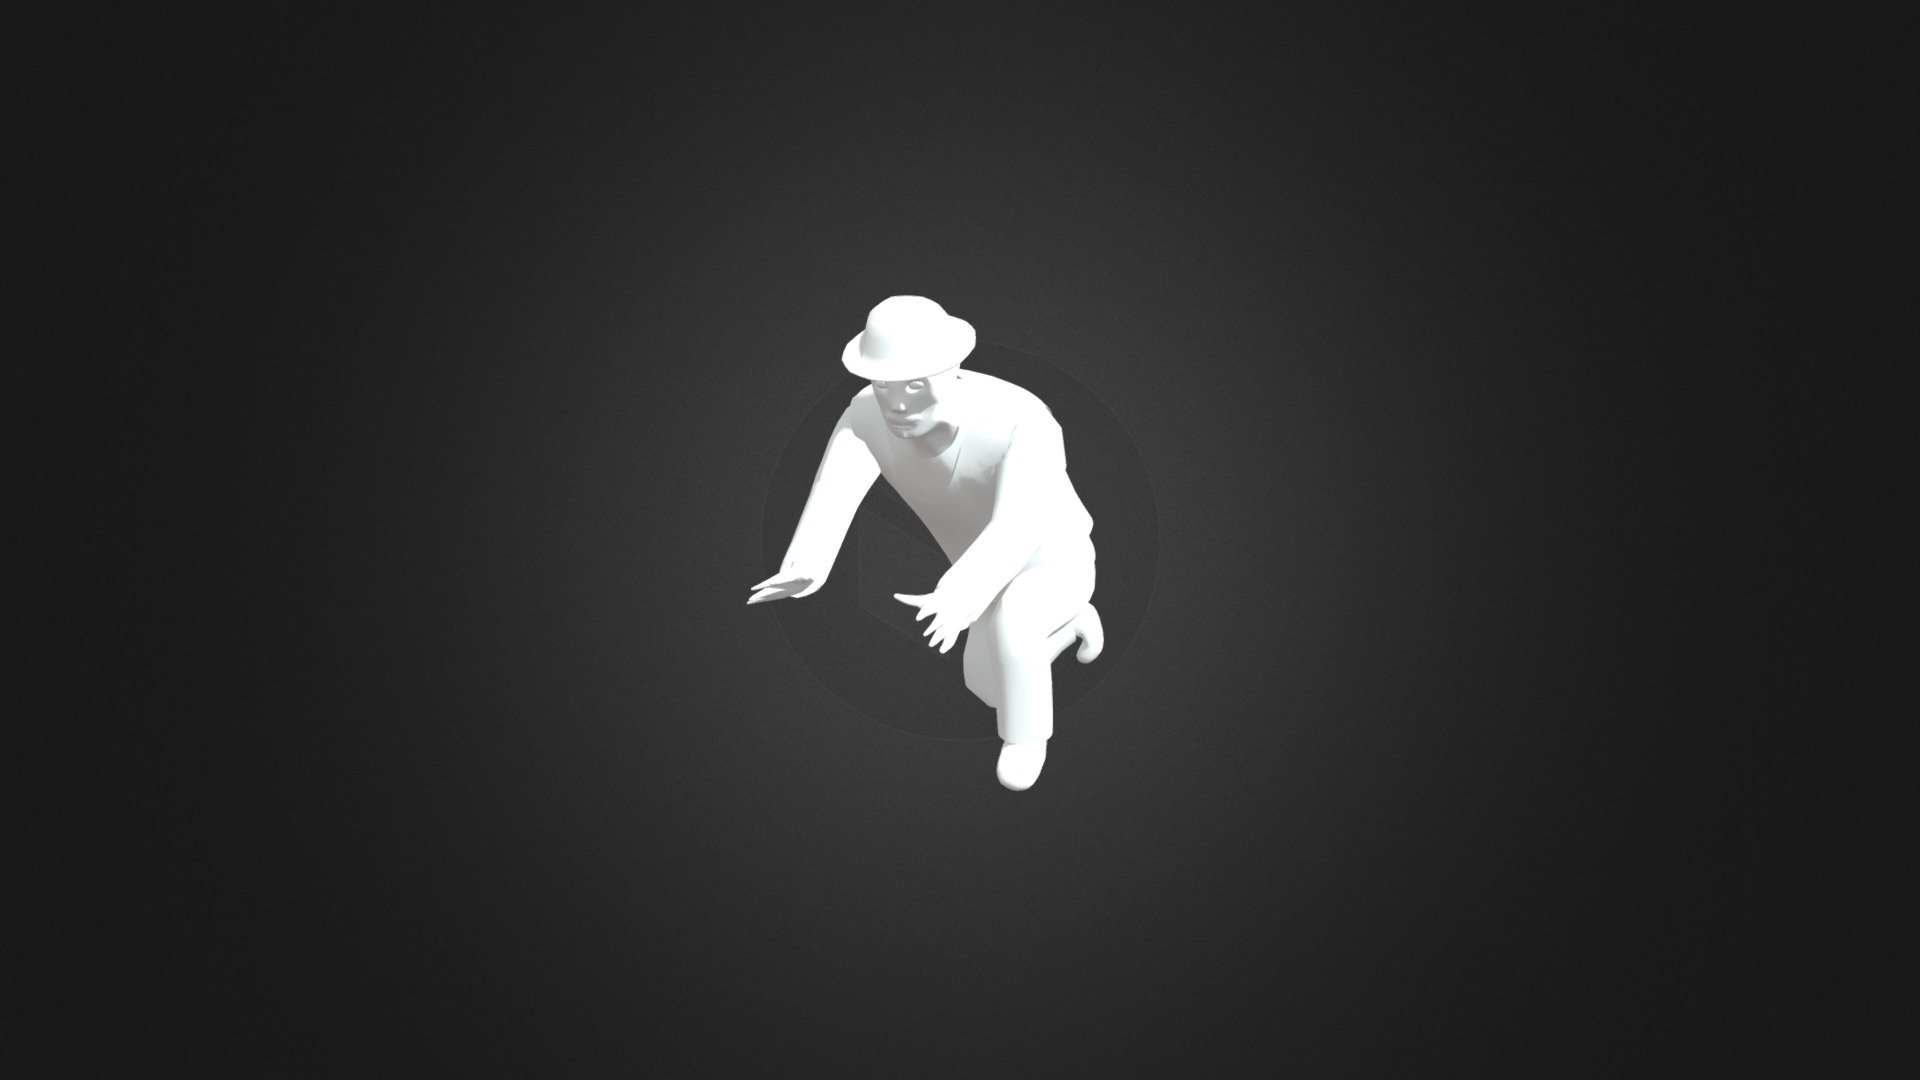 100653409 - Character Motion Captured Animation - 3D model by AbisheikThuraiyan 3d model